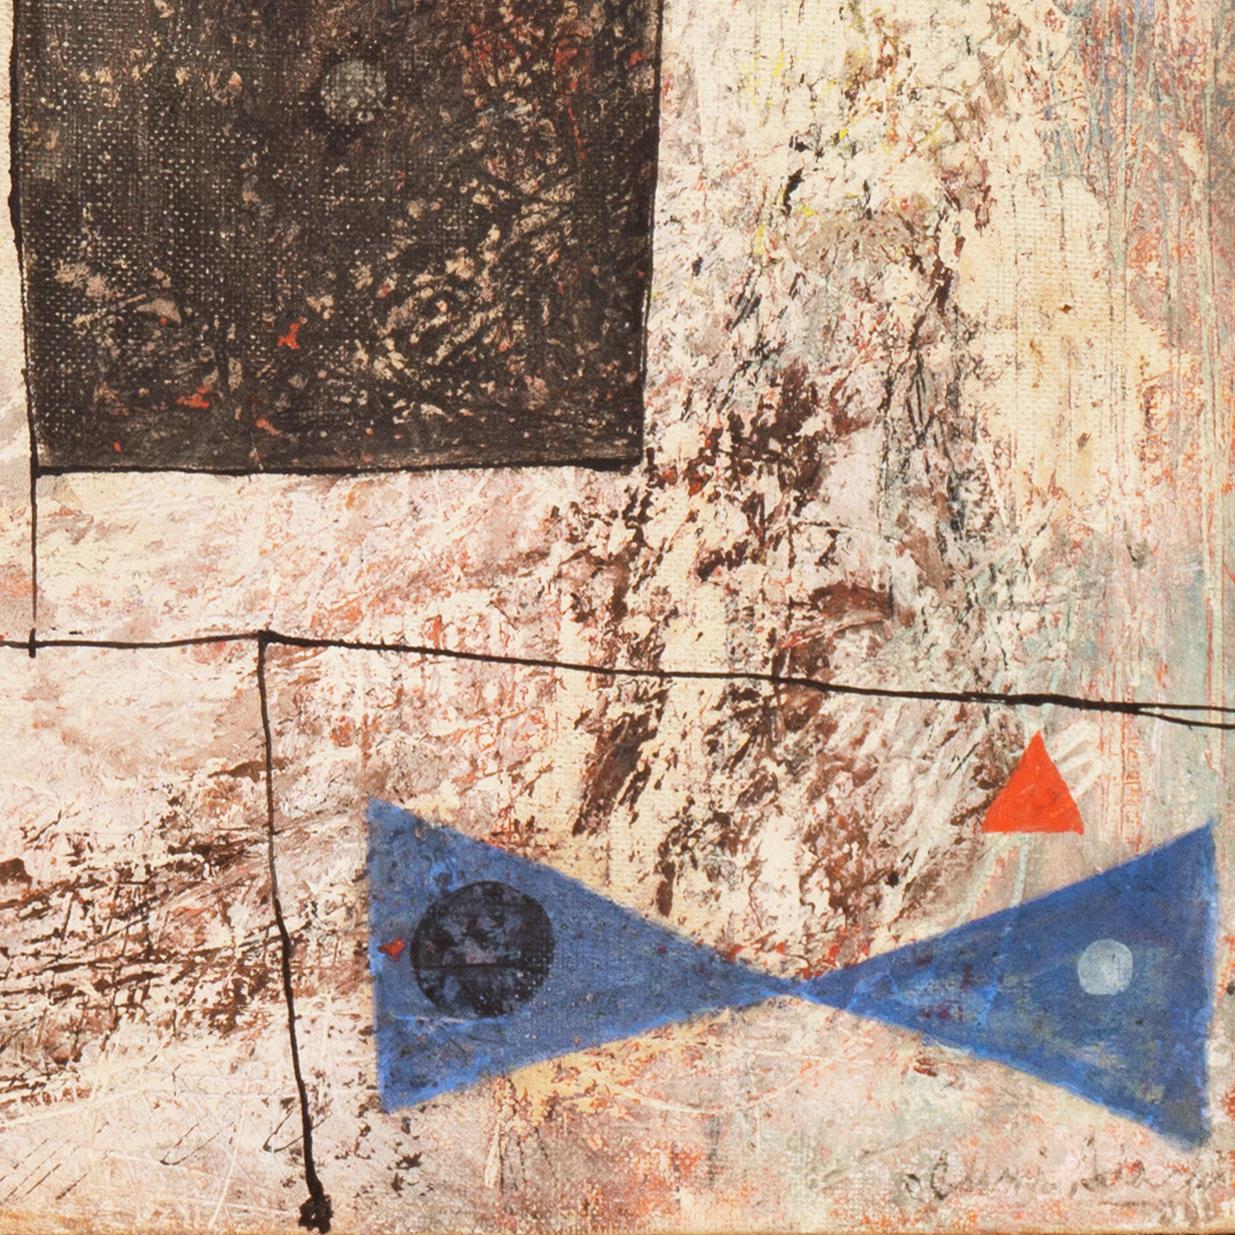 Signed lower right, 'Isami Adachi' (American, 20th century) and painted circa 1950.  

An elegant, mid-century geometric abstract comprising complex biomorphic elements in textured, pastel shades of red, blue, green bordered within linear fields and